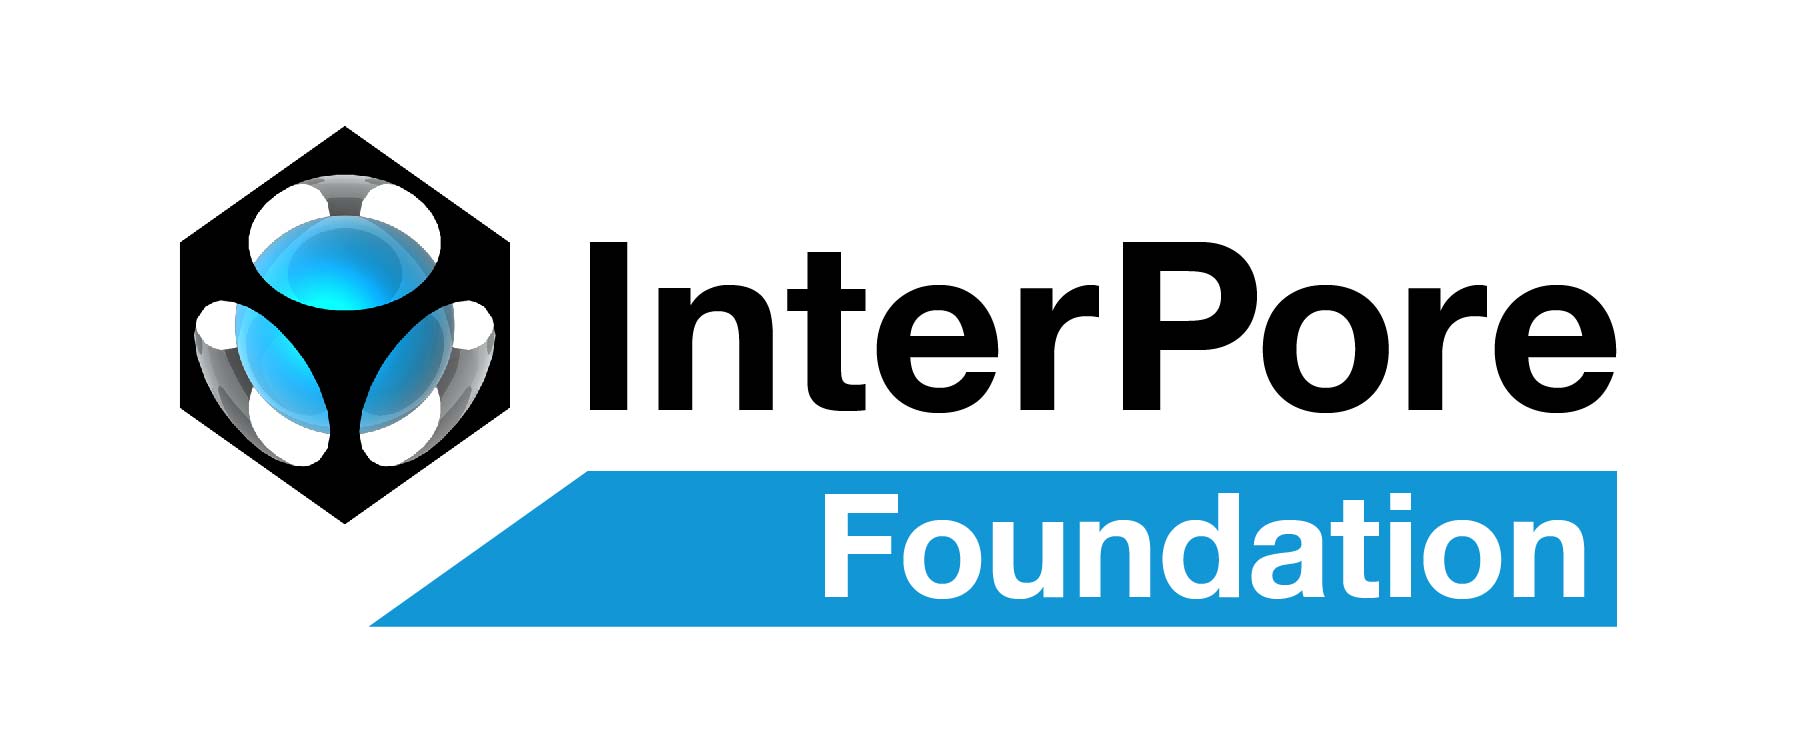 InterPore Foundation s - InterPore Newsletter 2022 (7) featuring lots of opportunities!